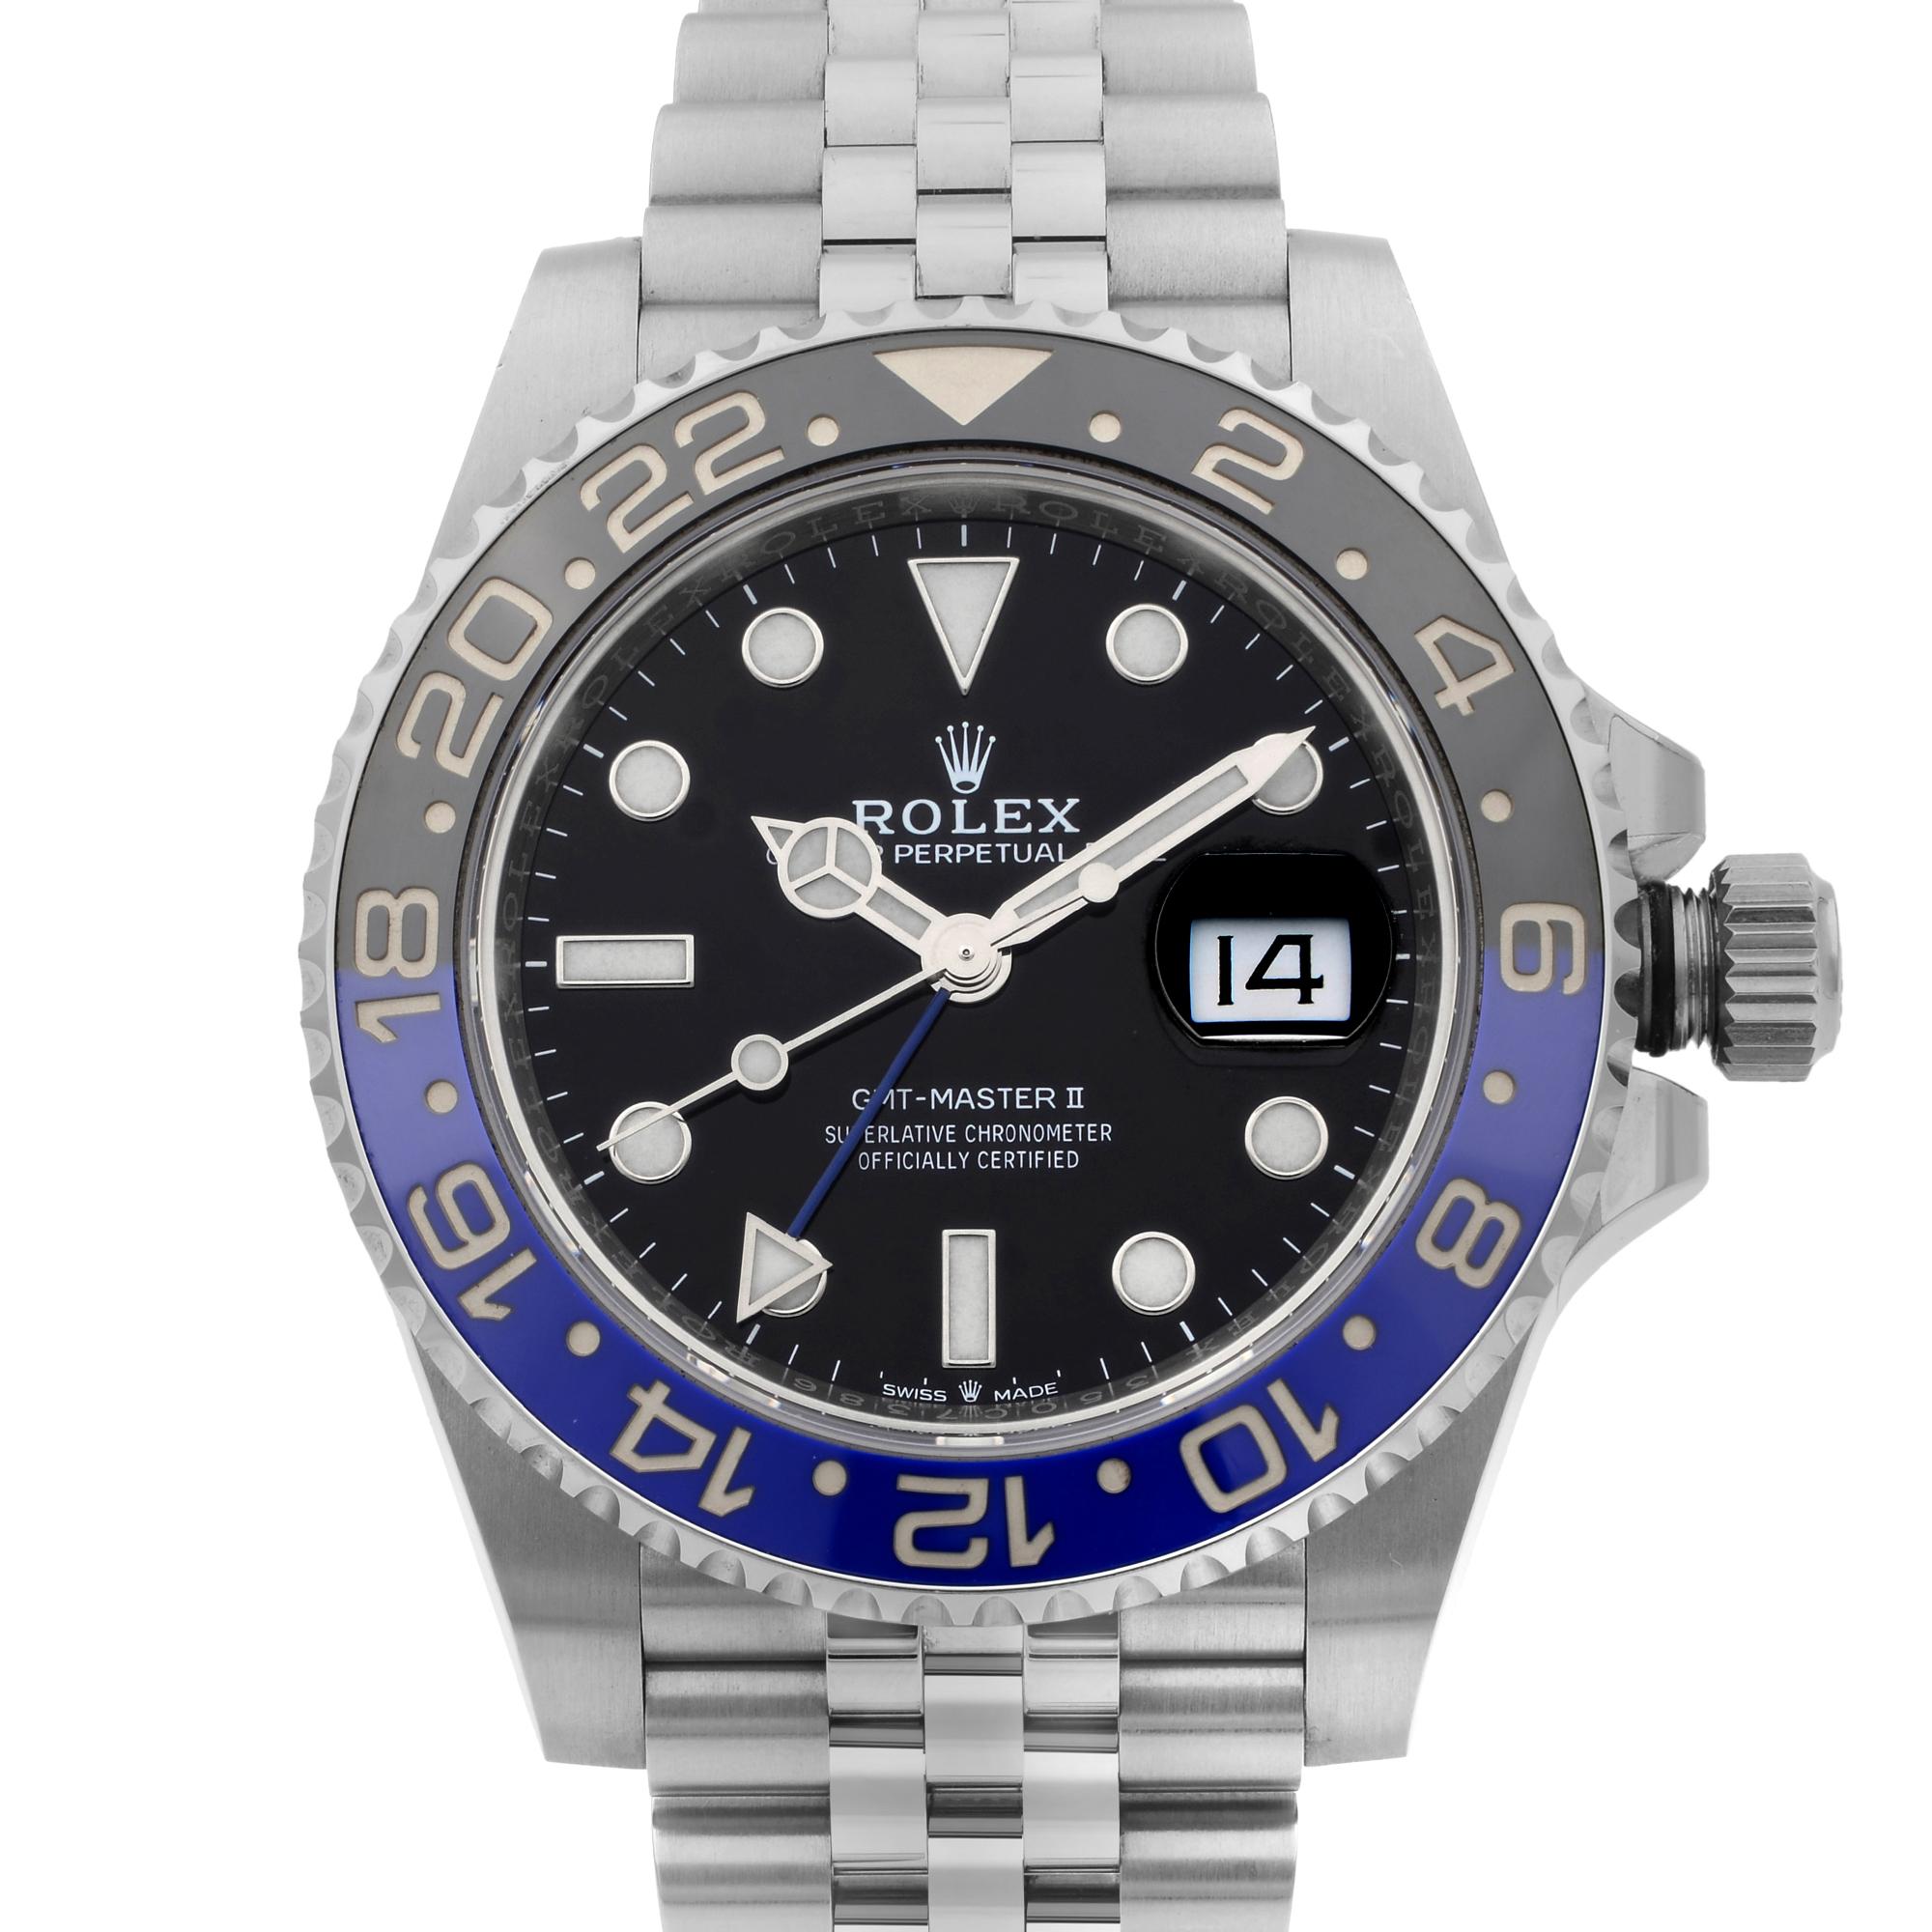 This display model Rolex GMT-Master II 126710BLNR  is a beautiful men's timepiece that is powered by a mechanical (automatic) movement which is cased in a stainless steel case. It has a round shape face, date indicator, dual time dial, and has hand